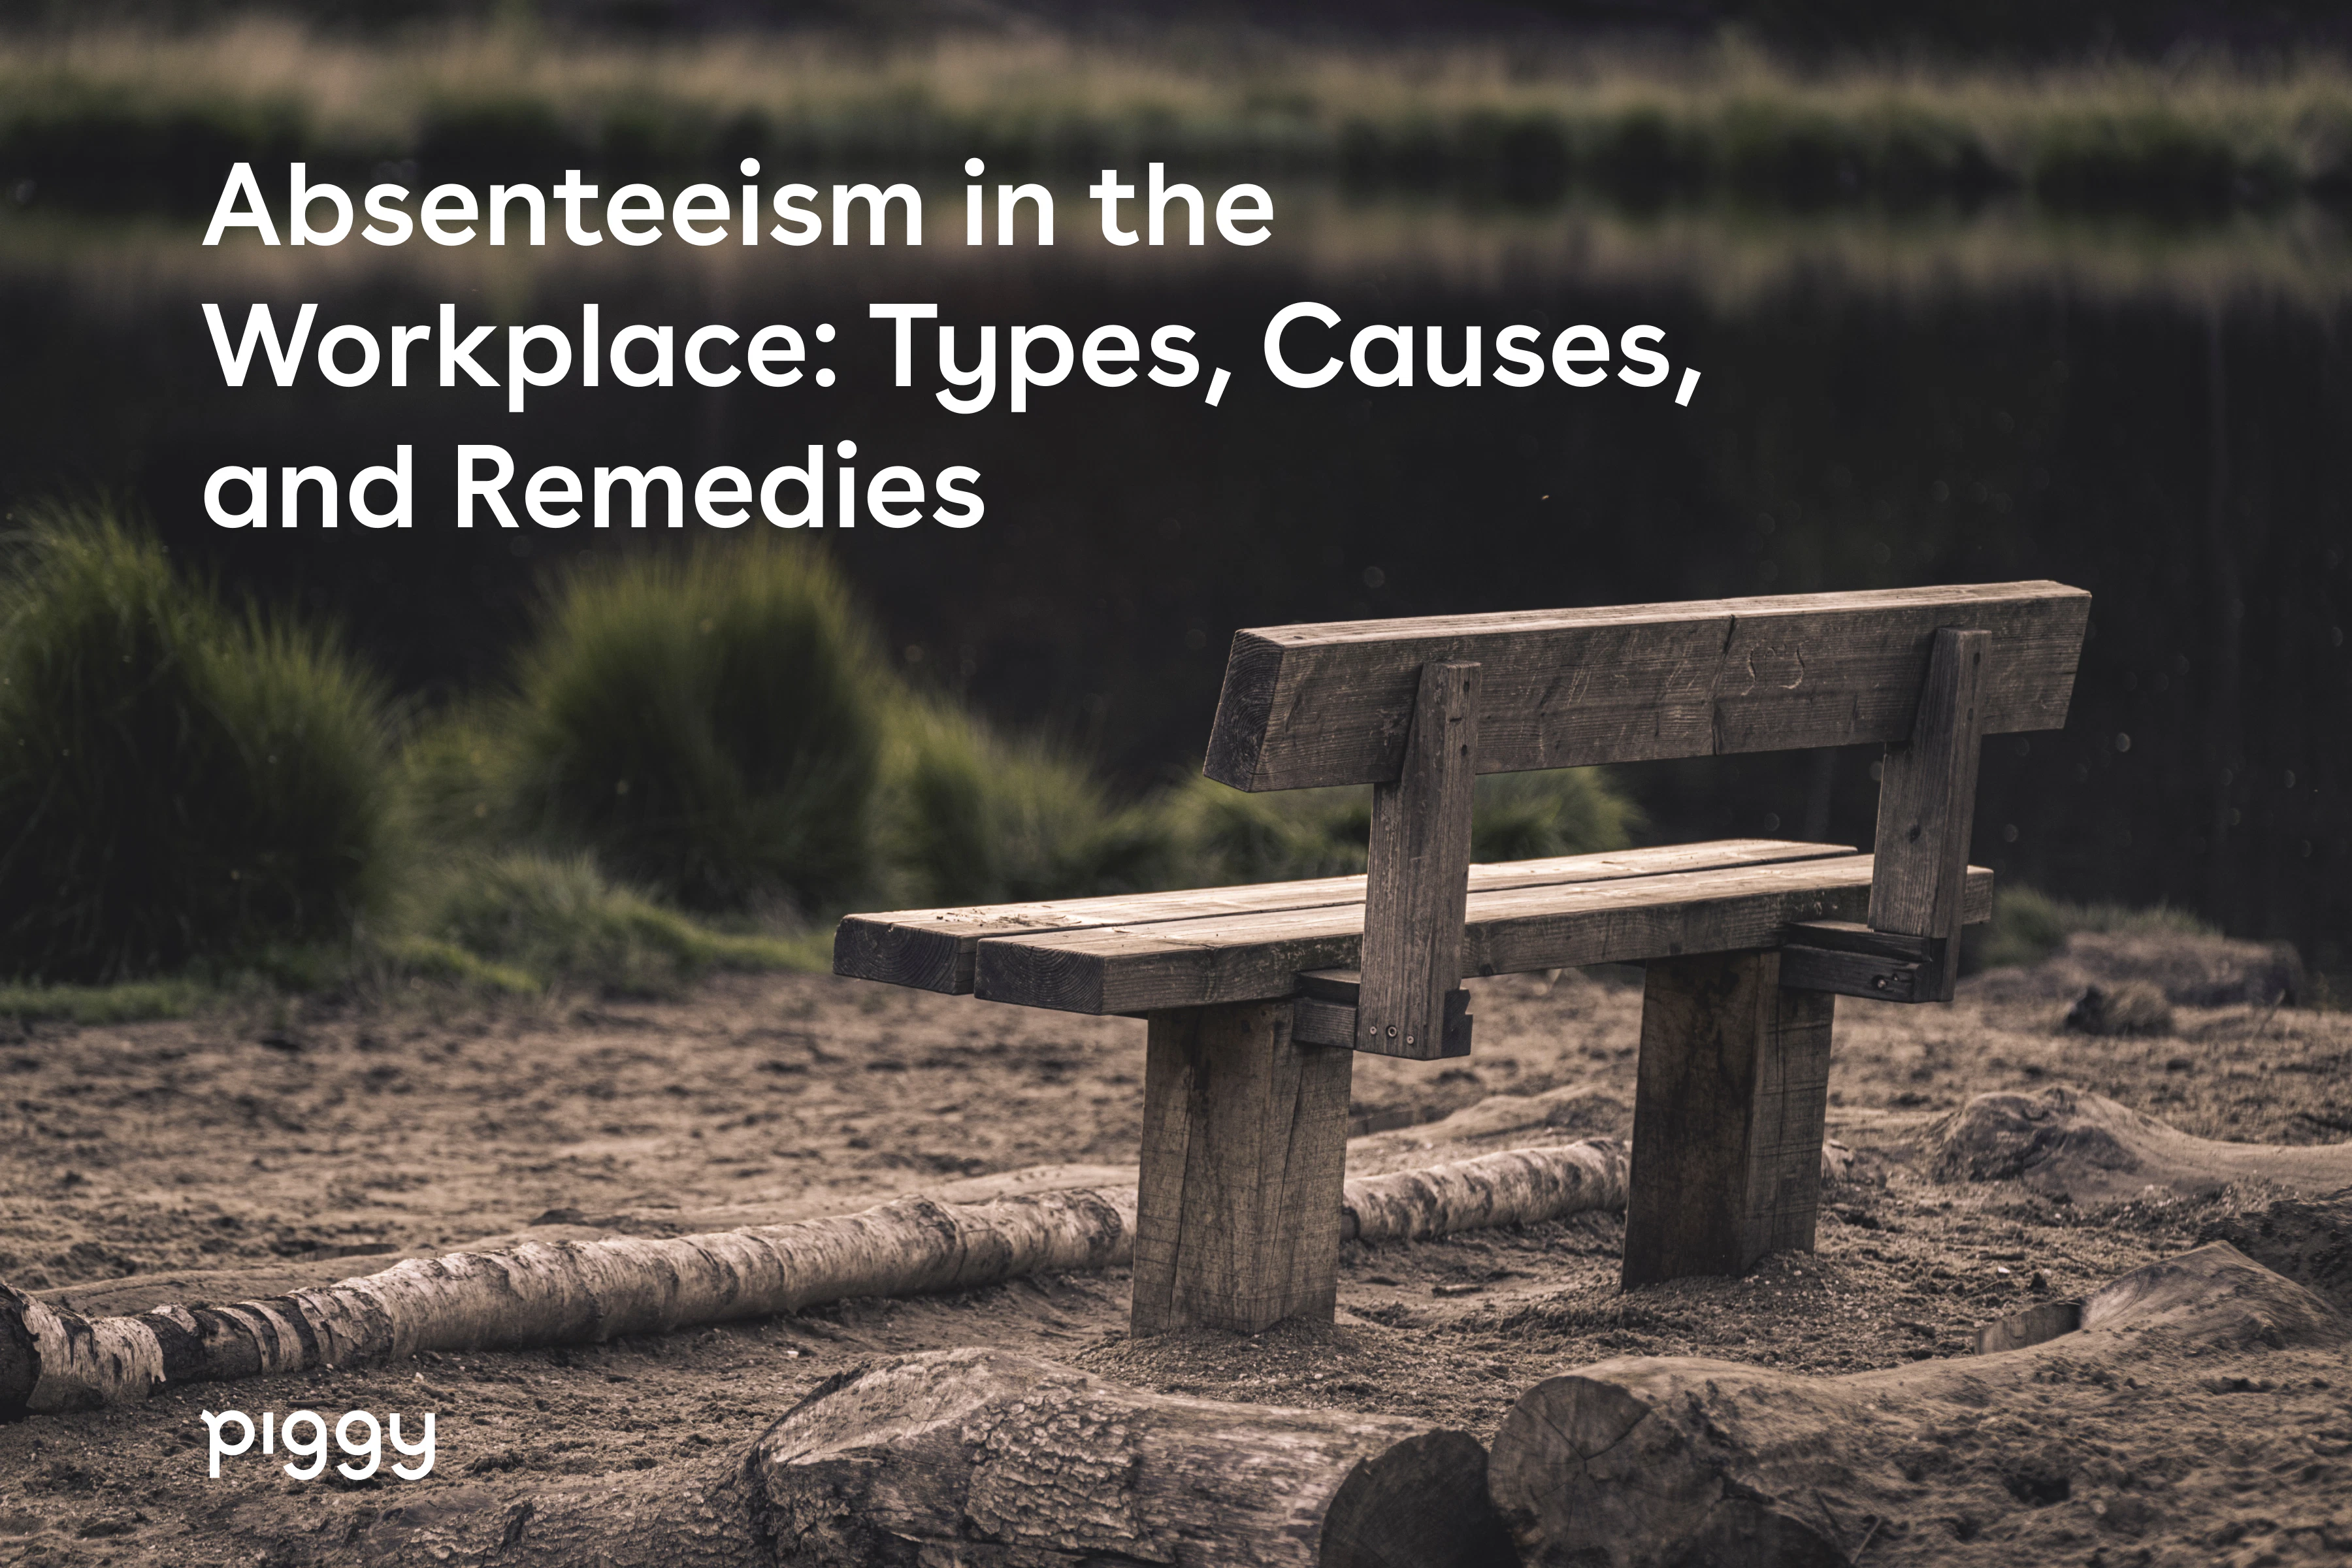 absenteeism-in-the-workplace